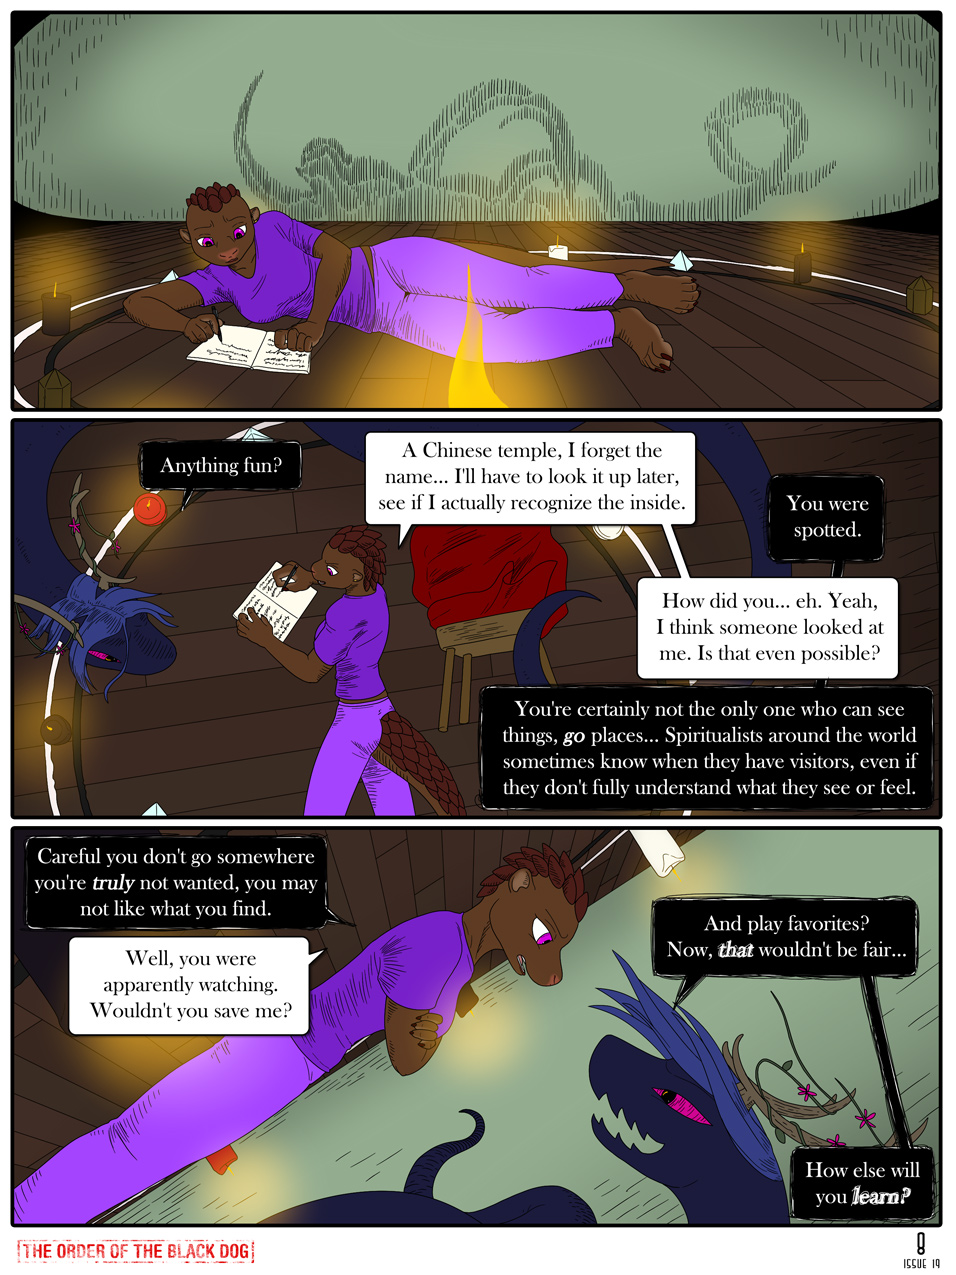 Issue 19, Page 8